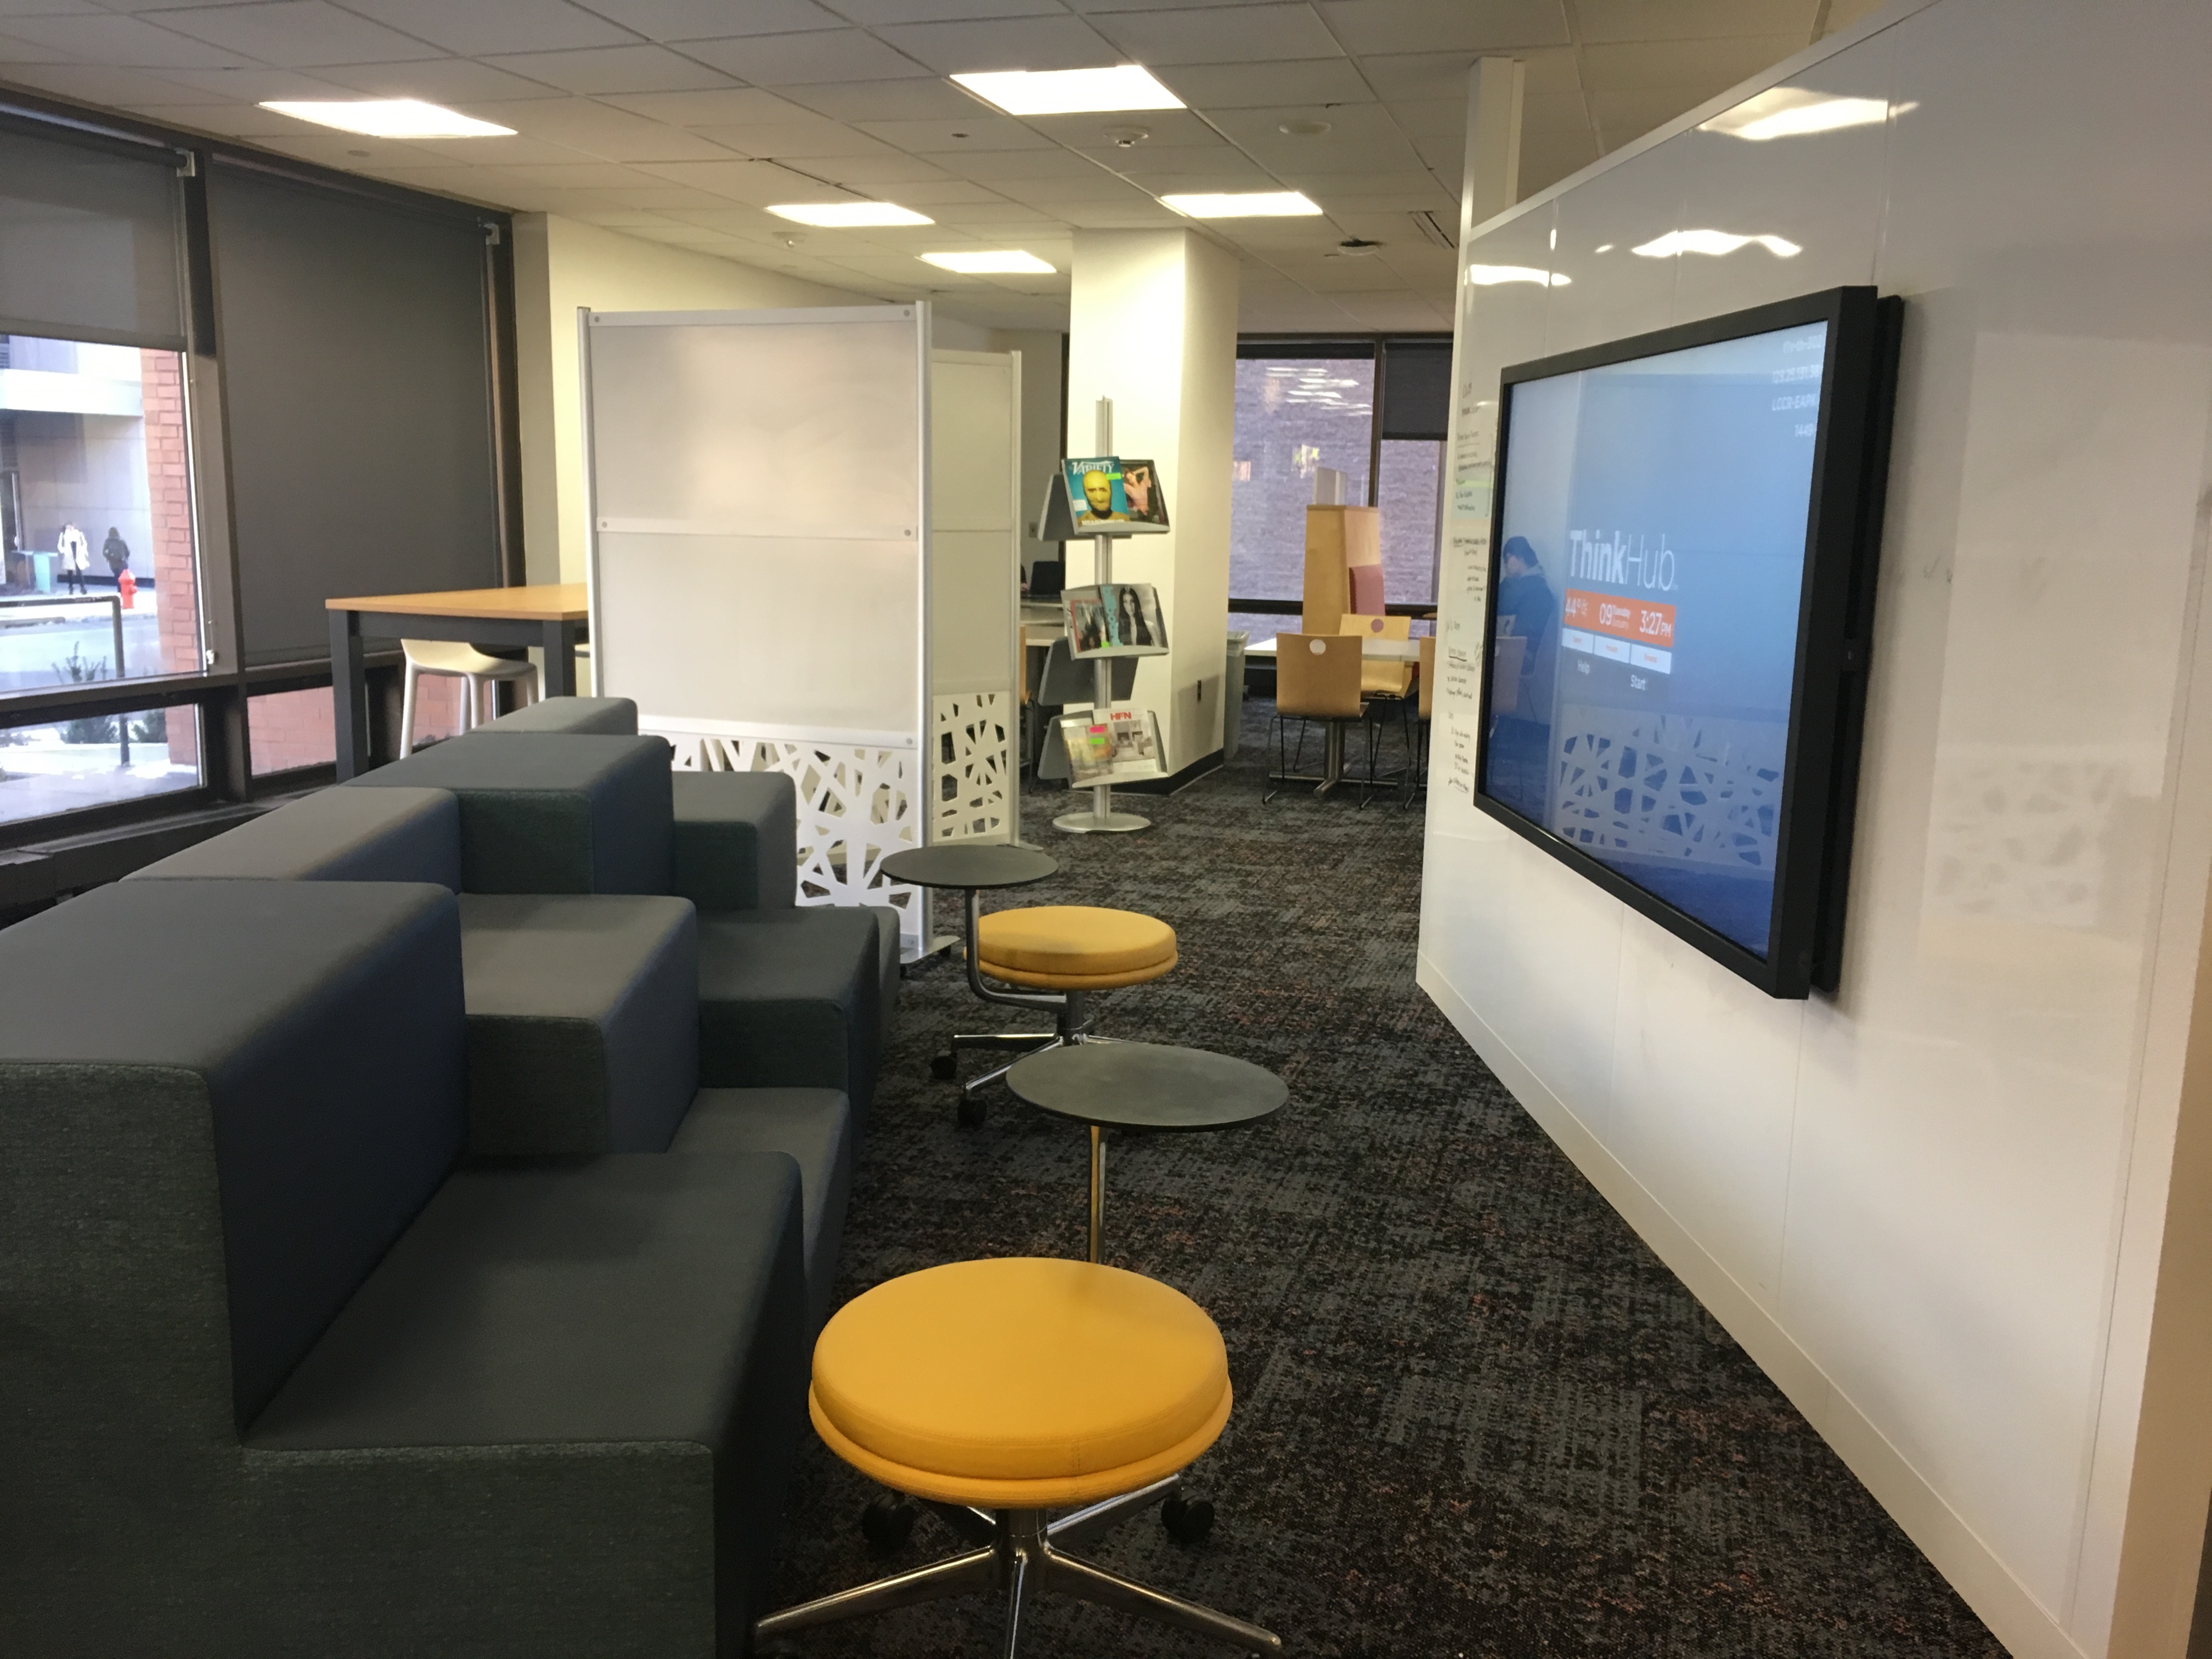 The Practice Zone in the W. W. Hagerty Library includes an 80' monitor and stadium-style seating